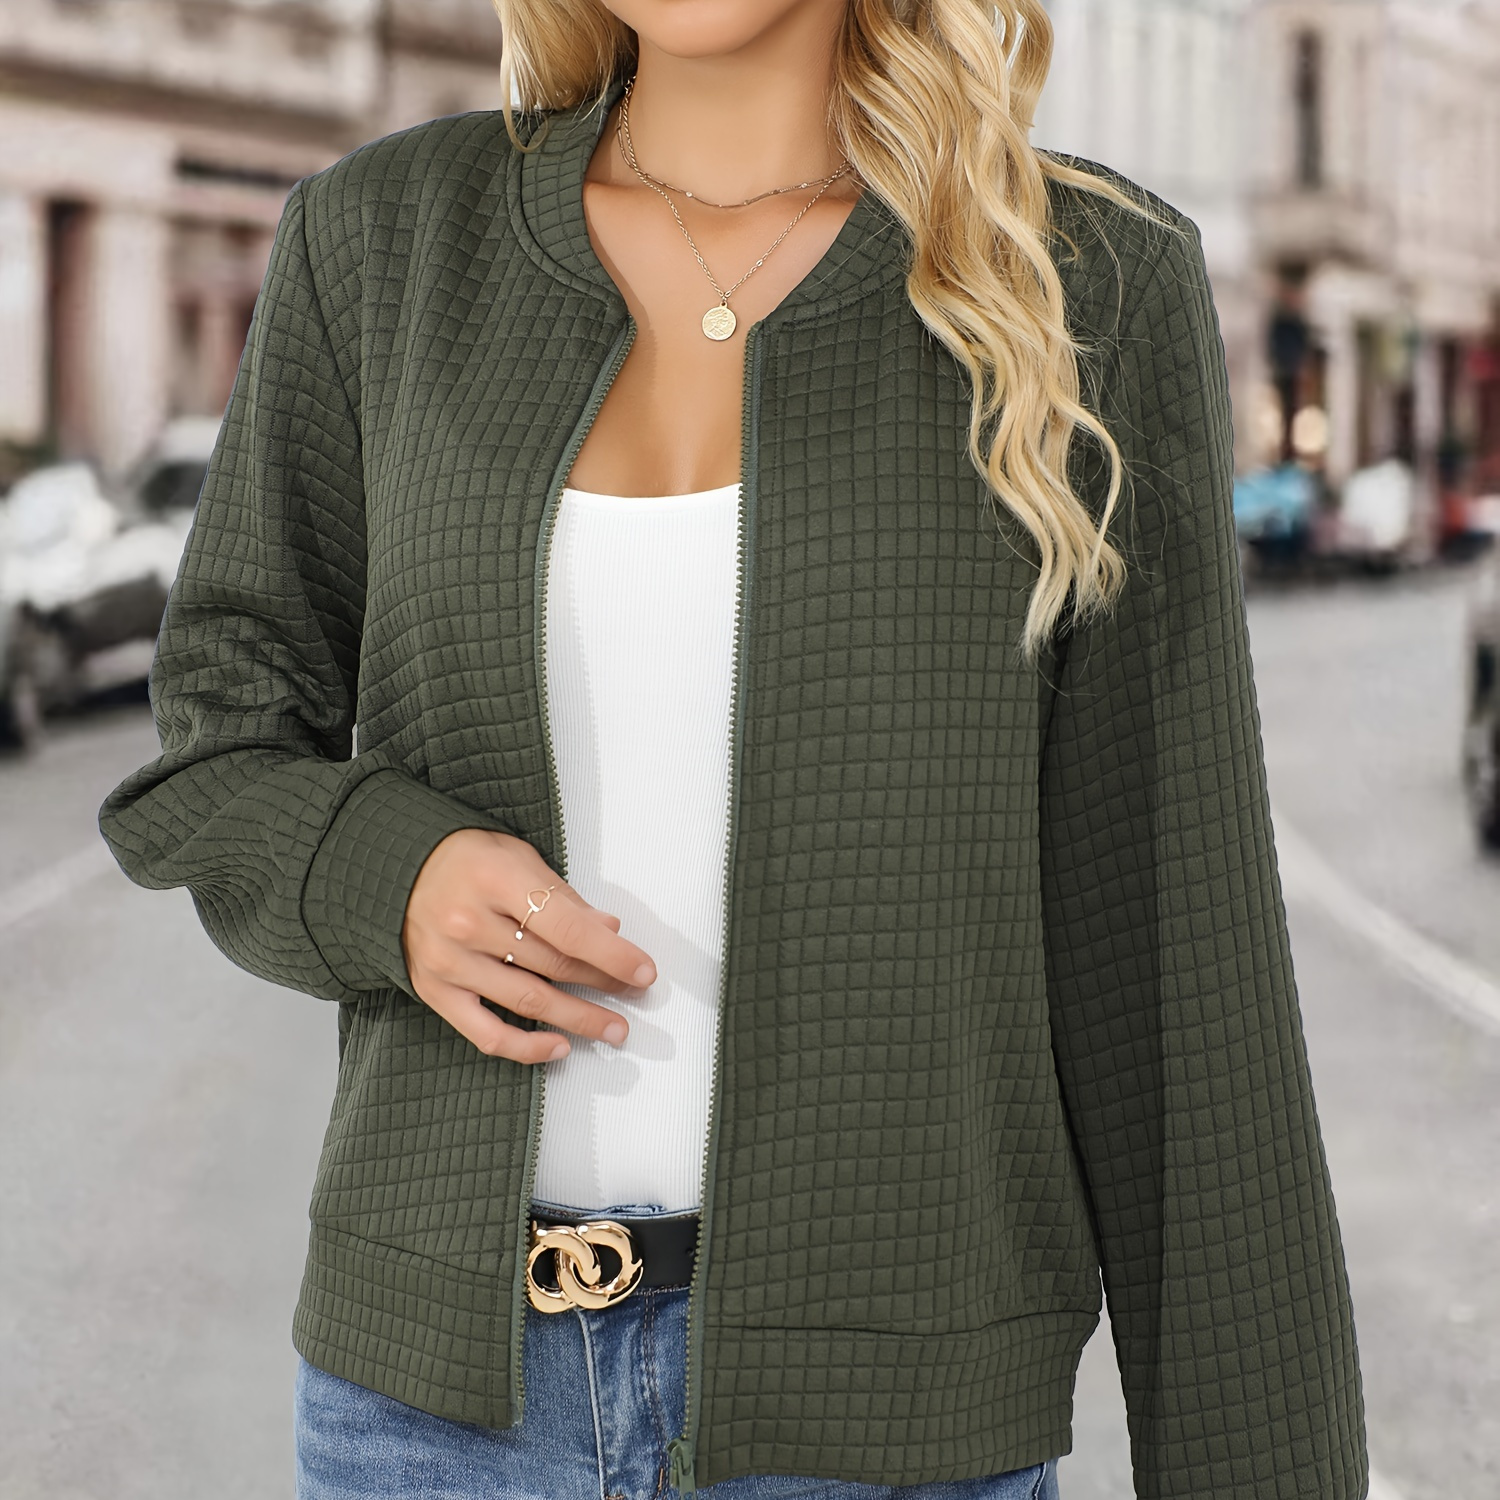 

Solid Color Textured Zipper Jacket, Elegant Long Sleeve Jacket For Spring & Fall, Women's Clothing